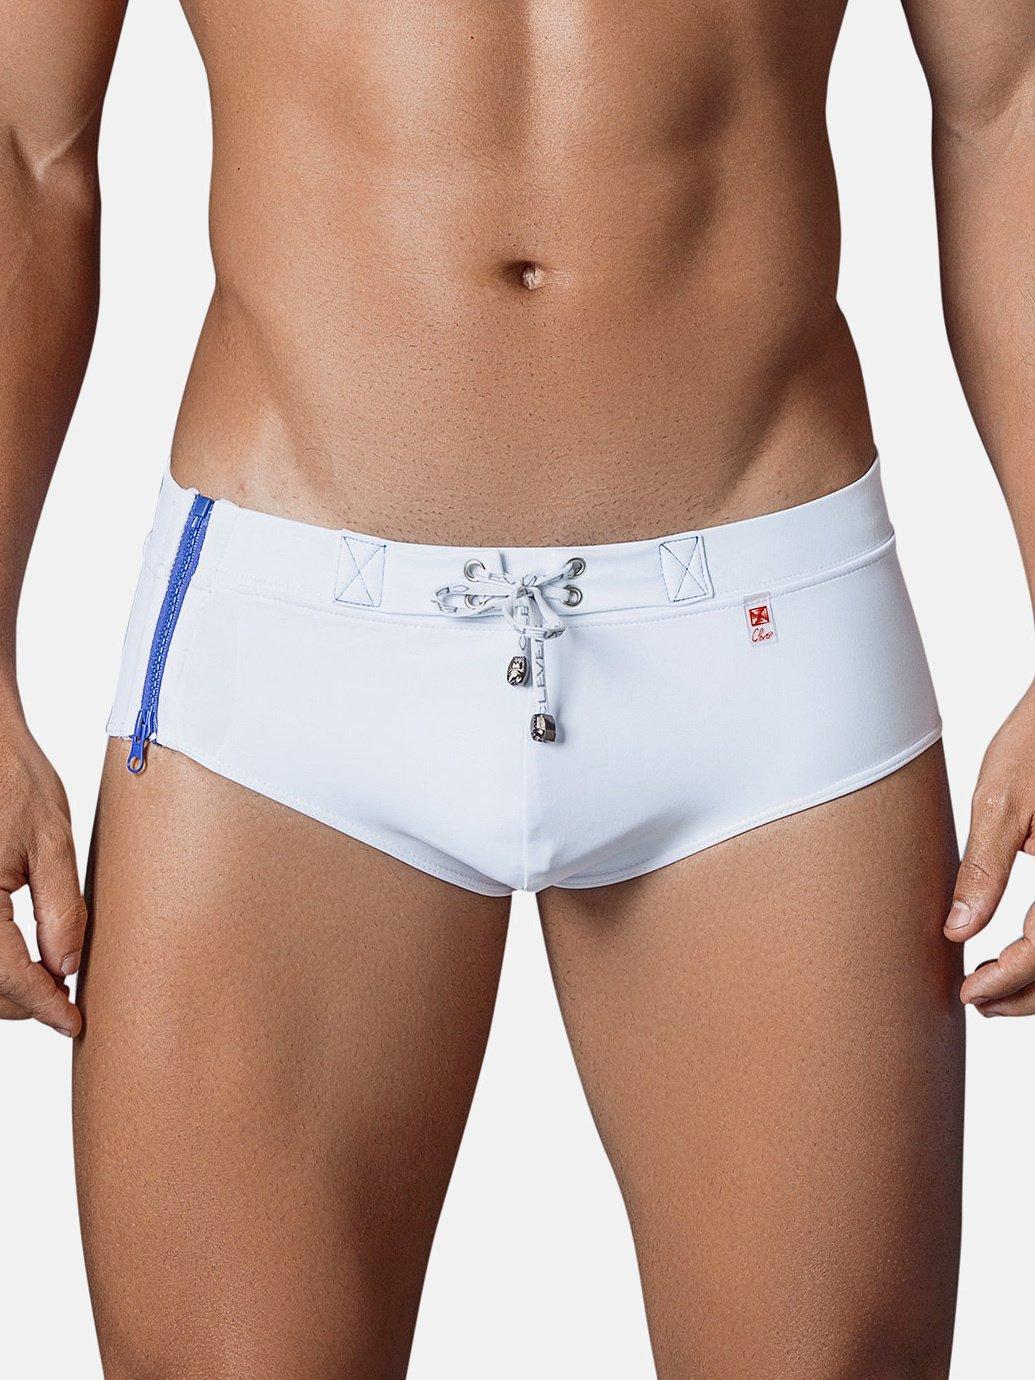 Image of Clever Badehose Zipper - S